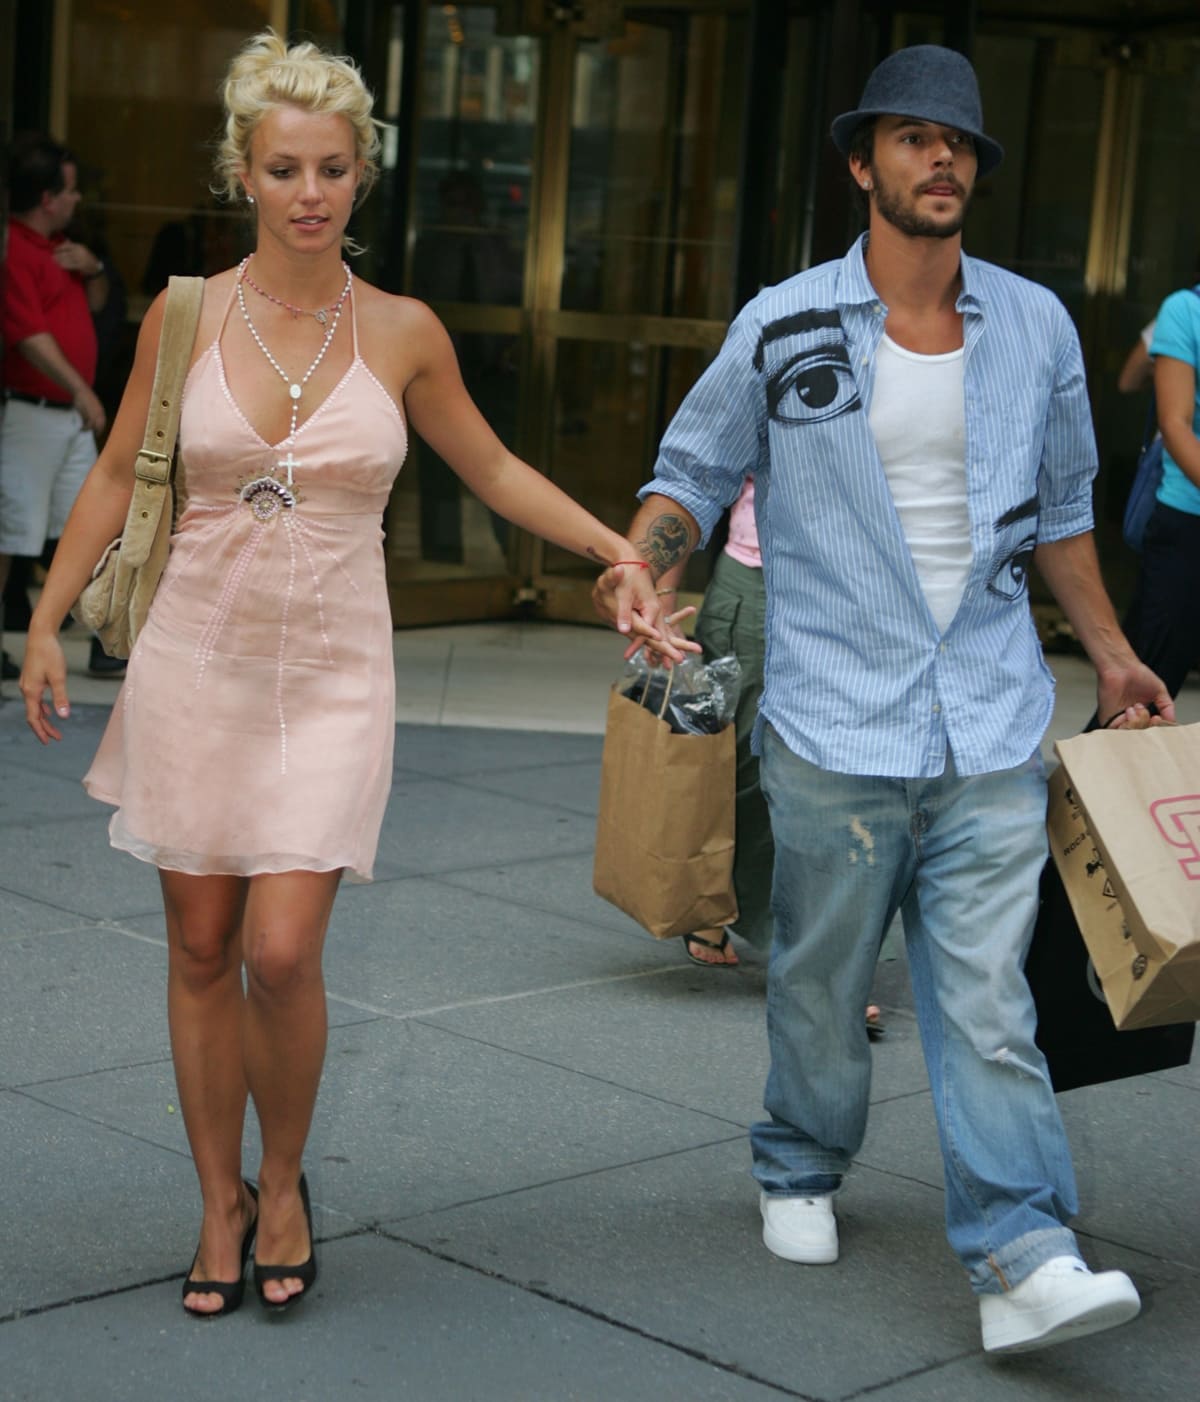 Britney Spears and Kevin Federline share two sons together and were married from 2004 to 2007